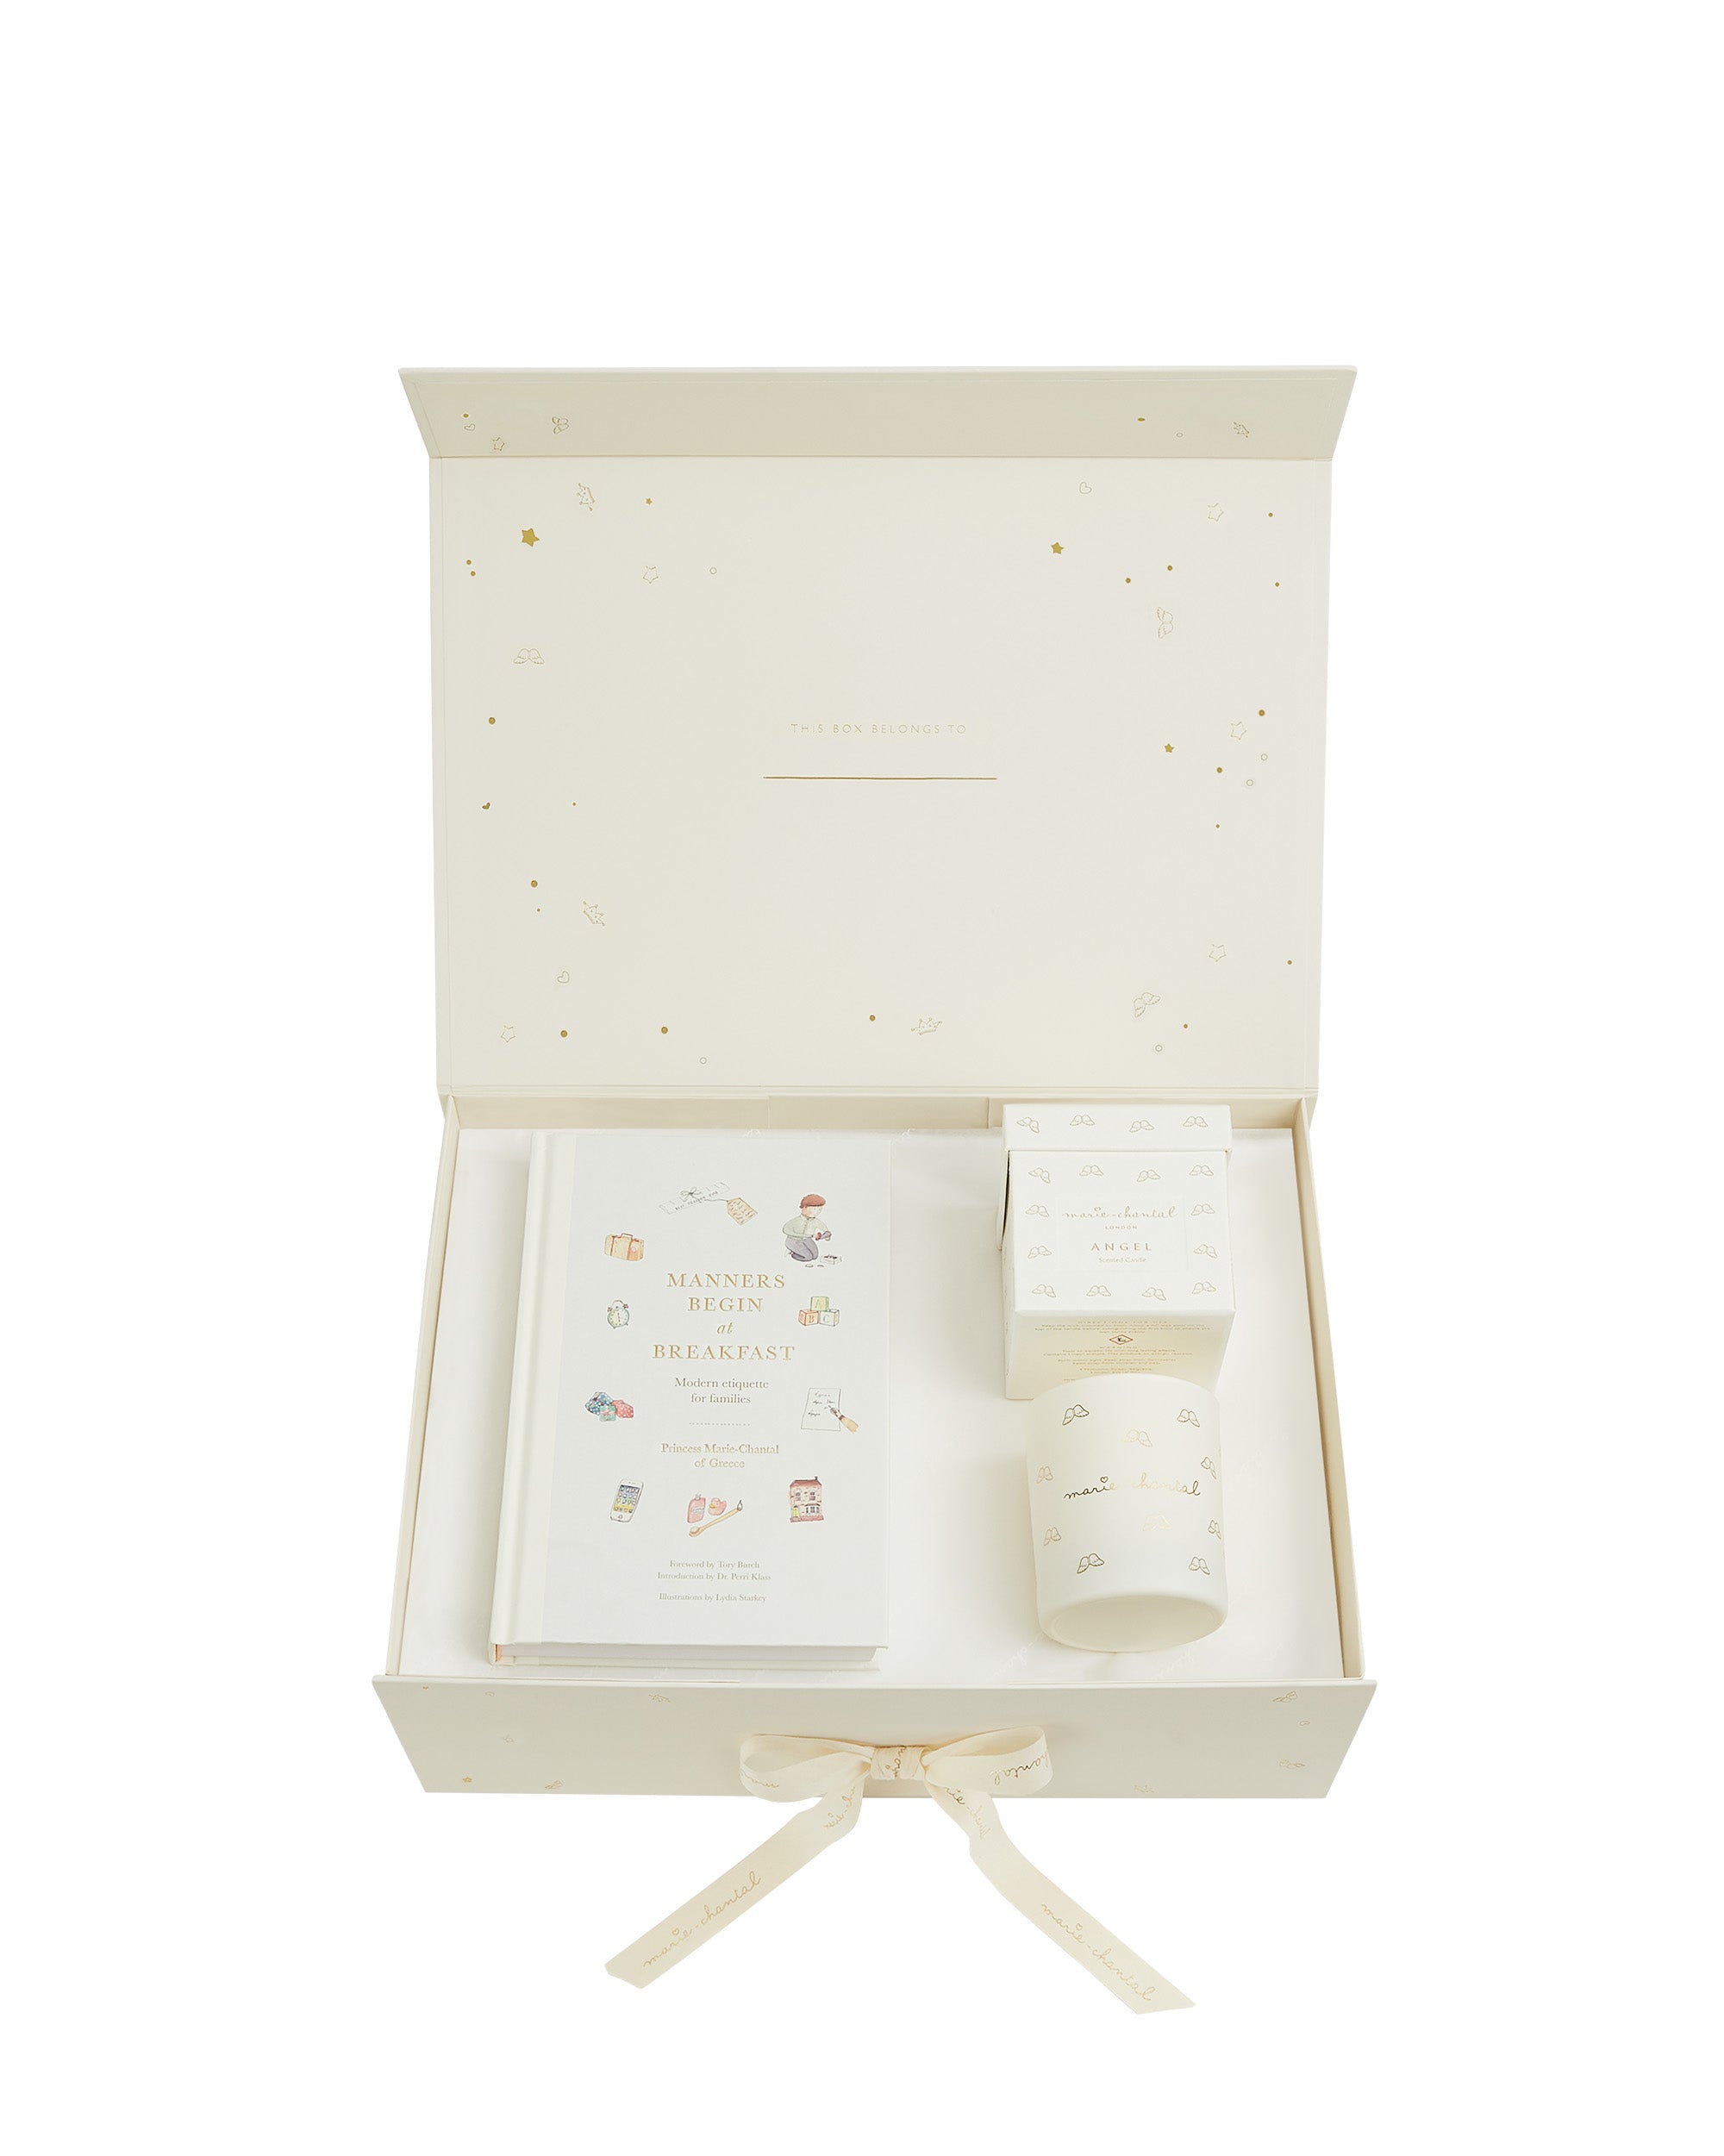 Manners Begin at Breakfast Gift Set